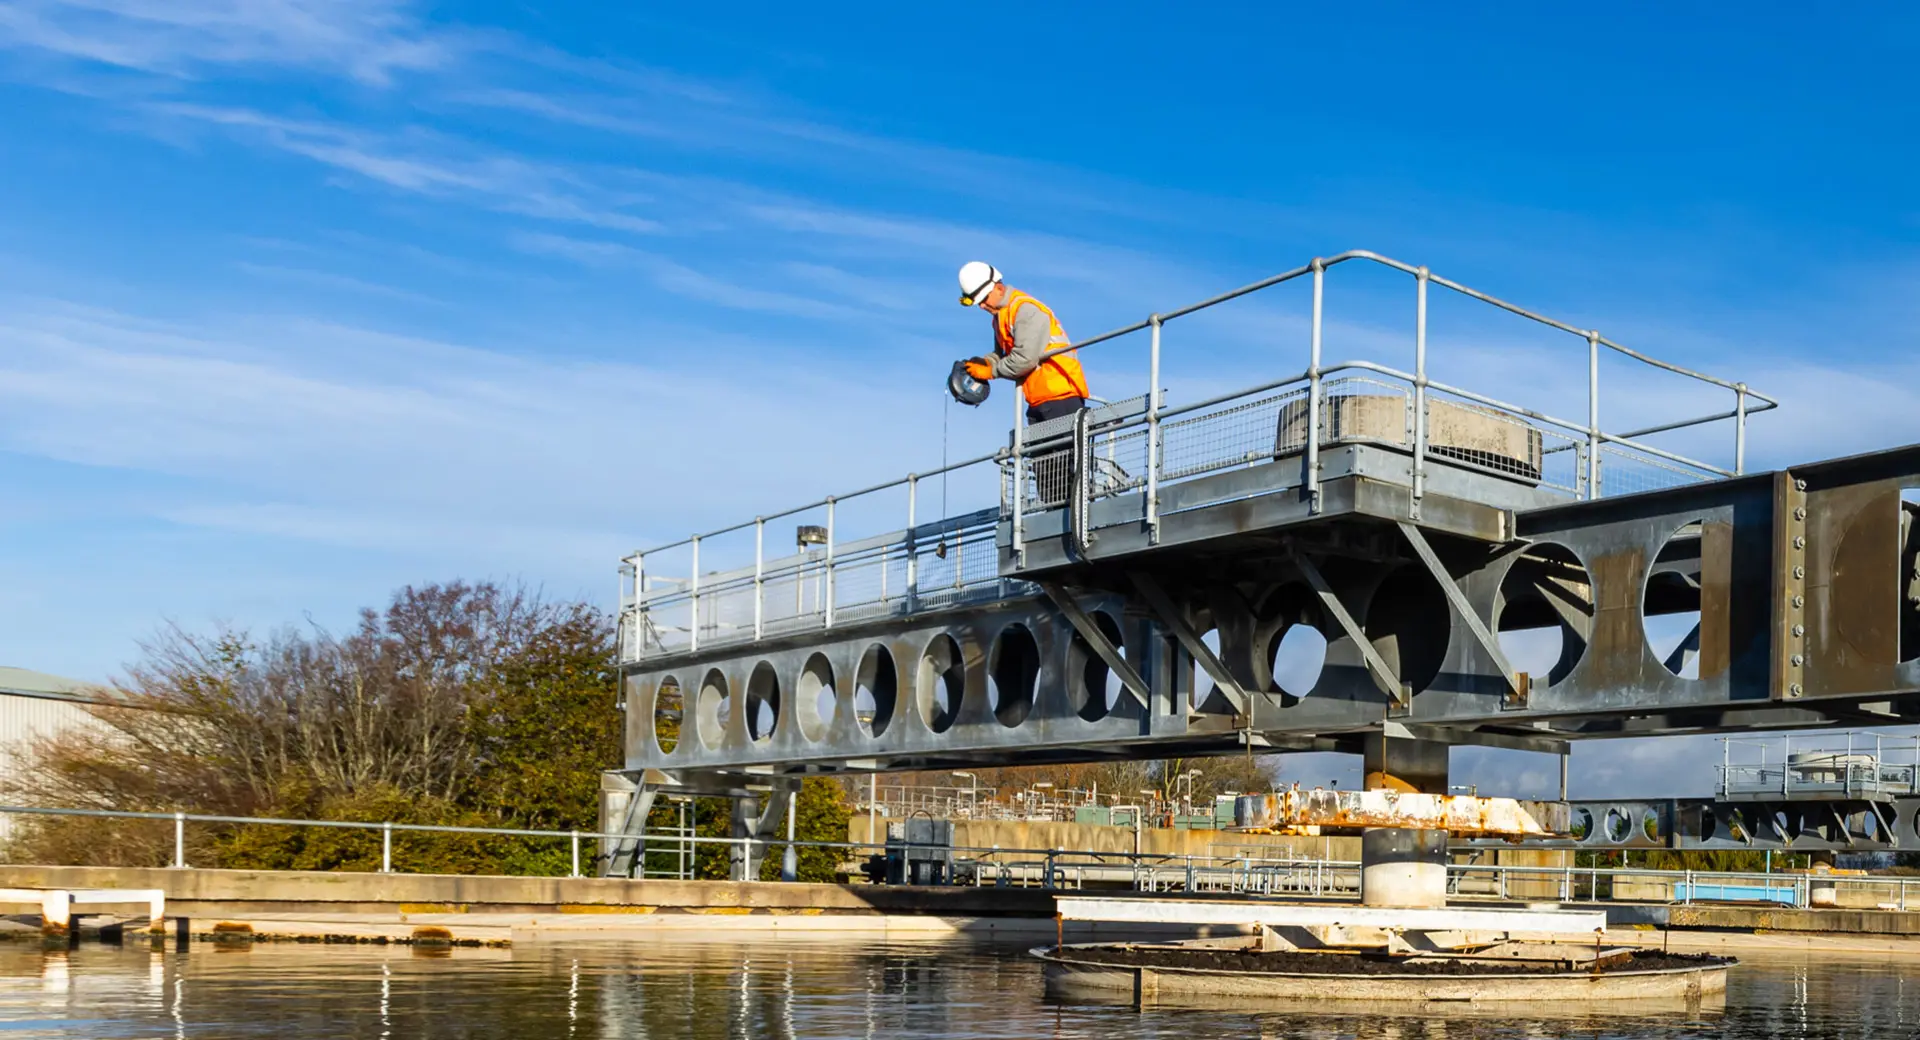 A photo of John Robertson working on a platform pertruding above a body of water